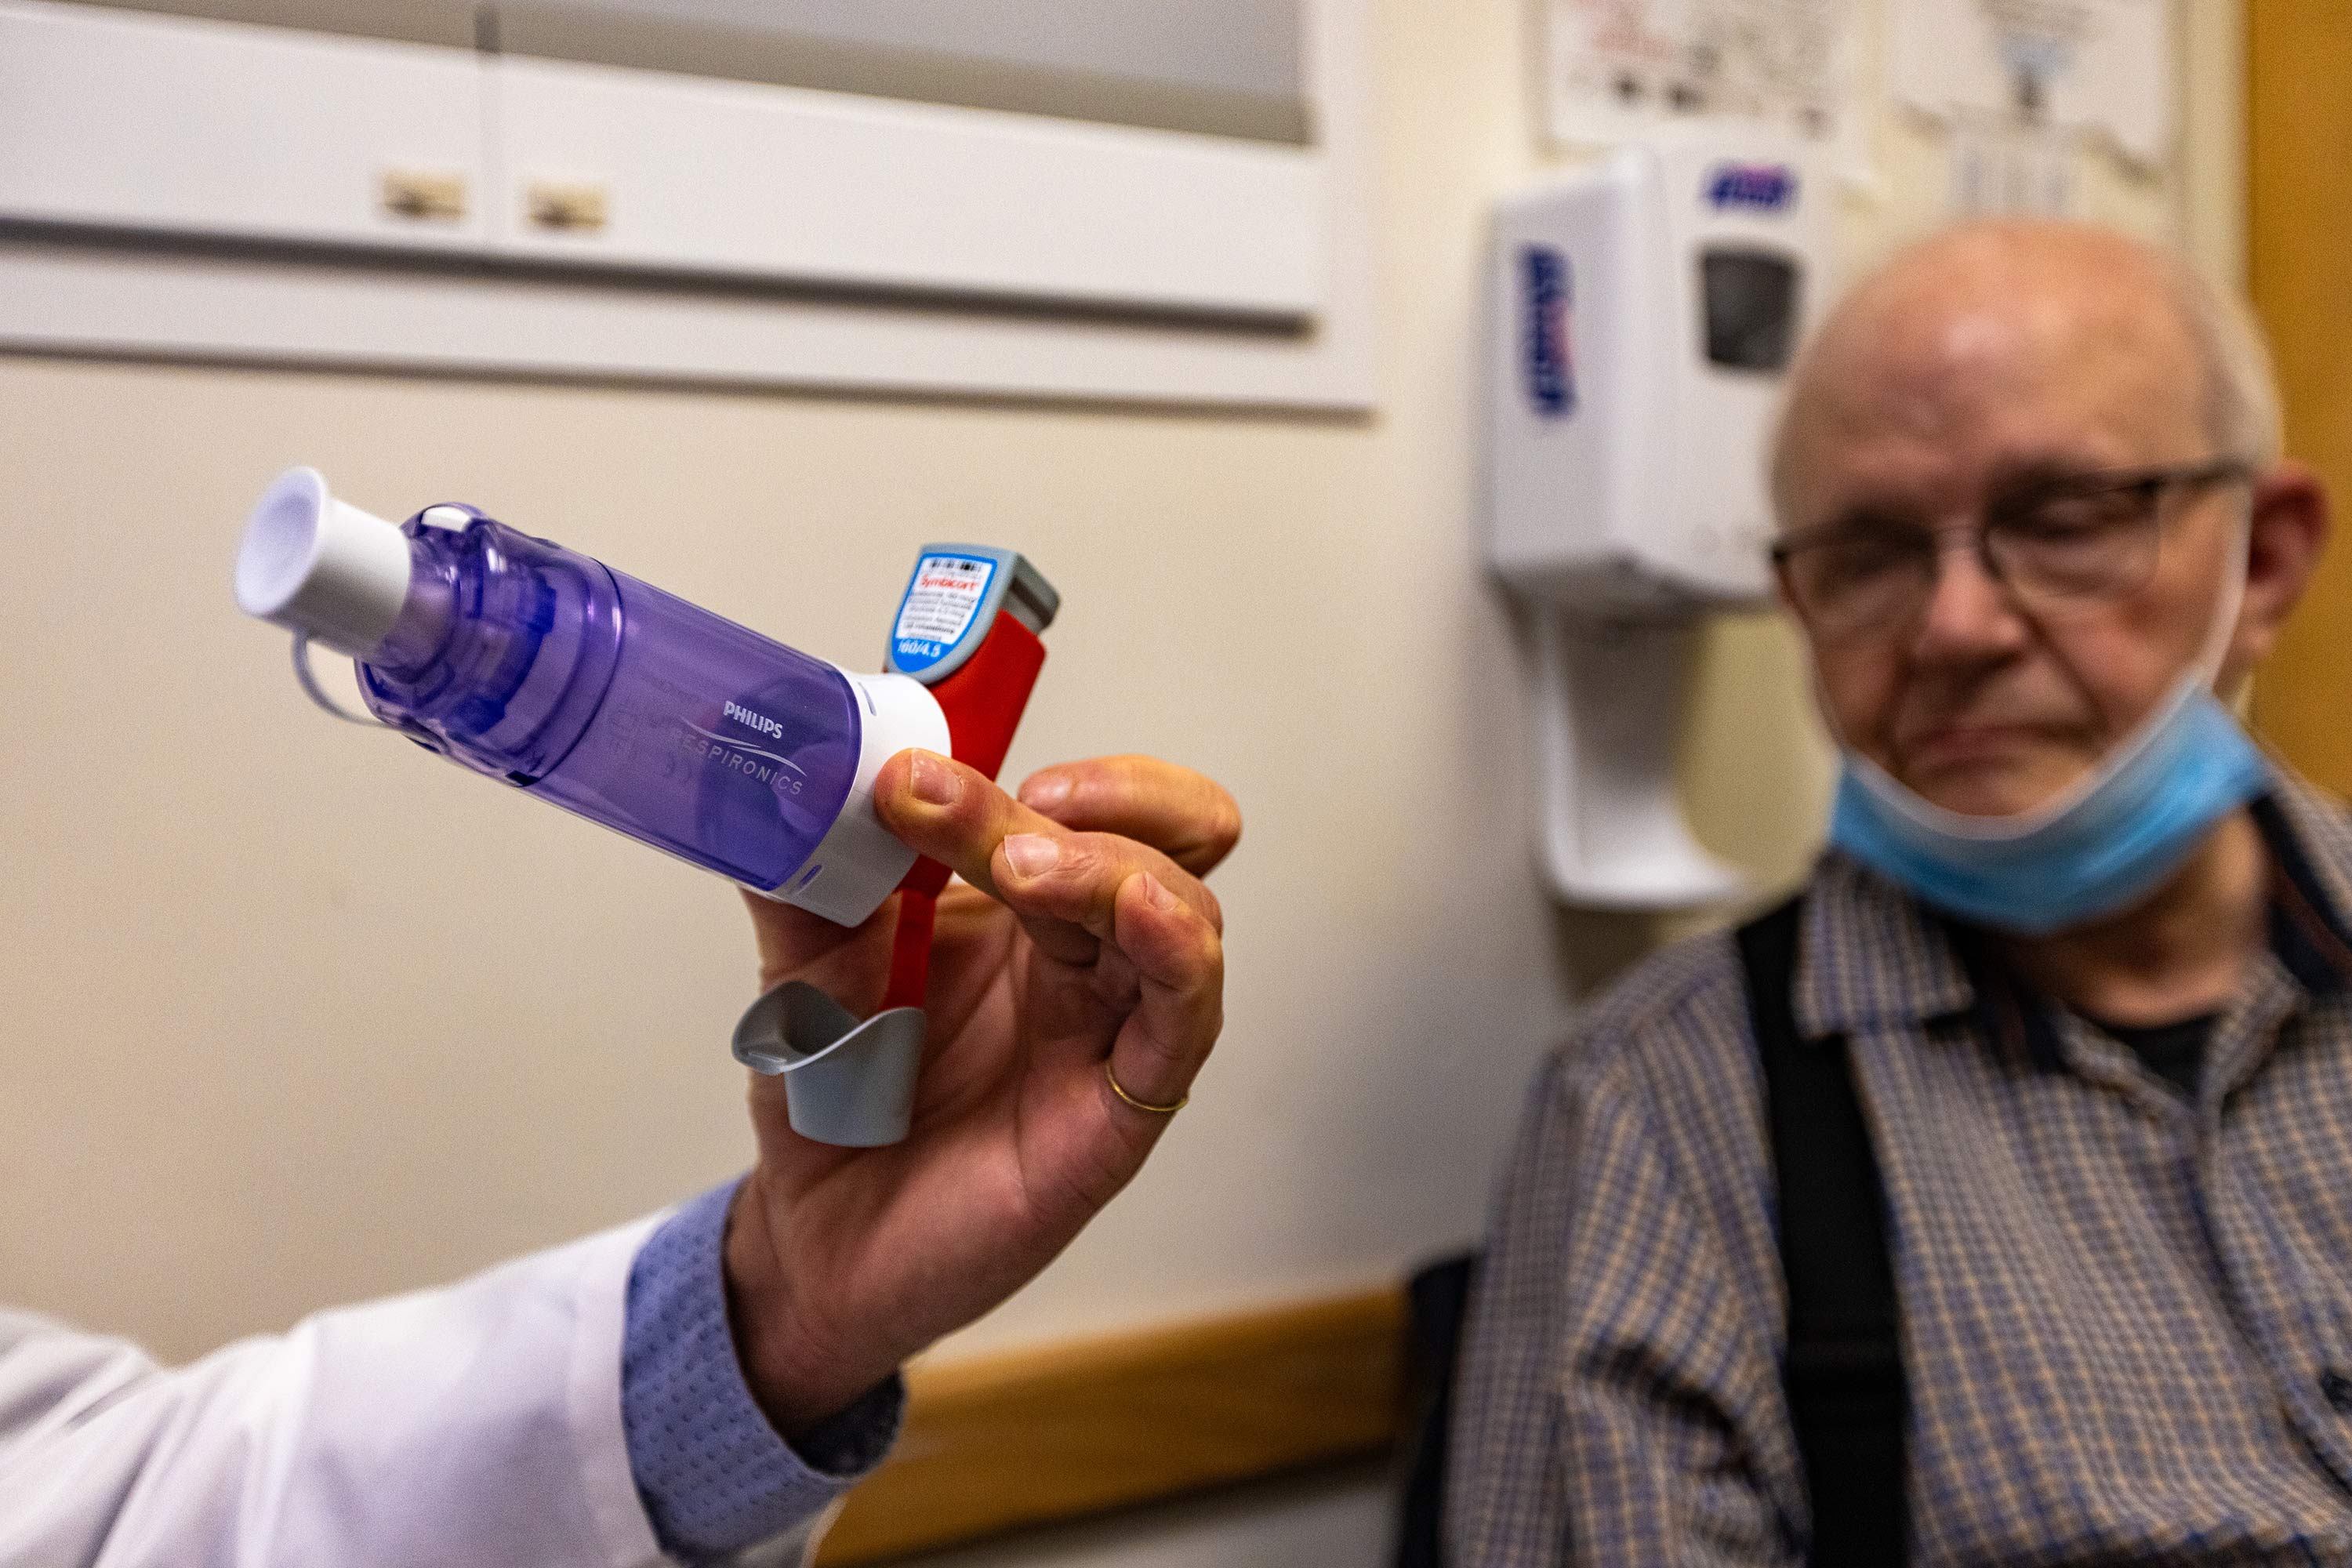 A photo of a doctor's hand holding up a metered-dose inhaler. His patient is seen looking at it in the background.